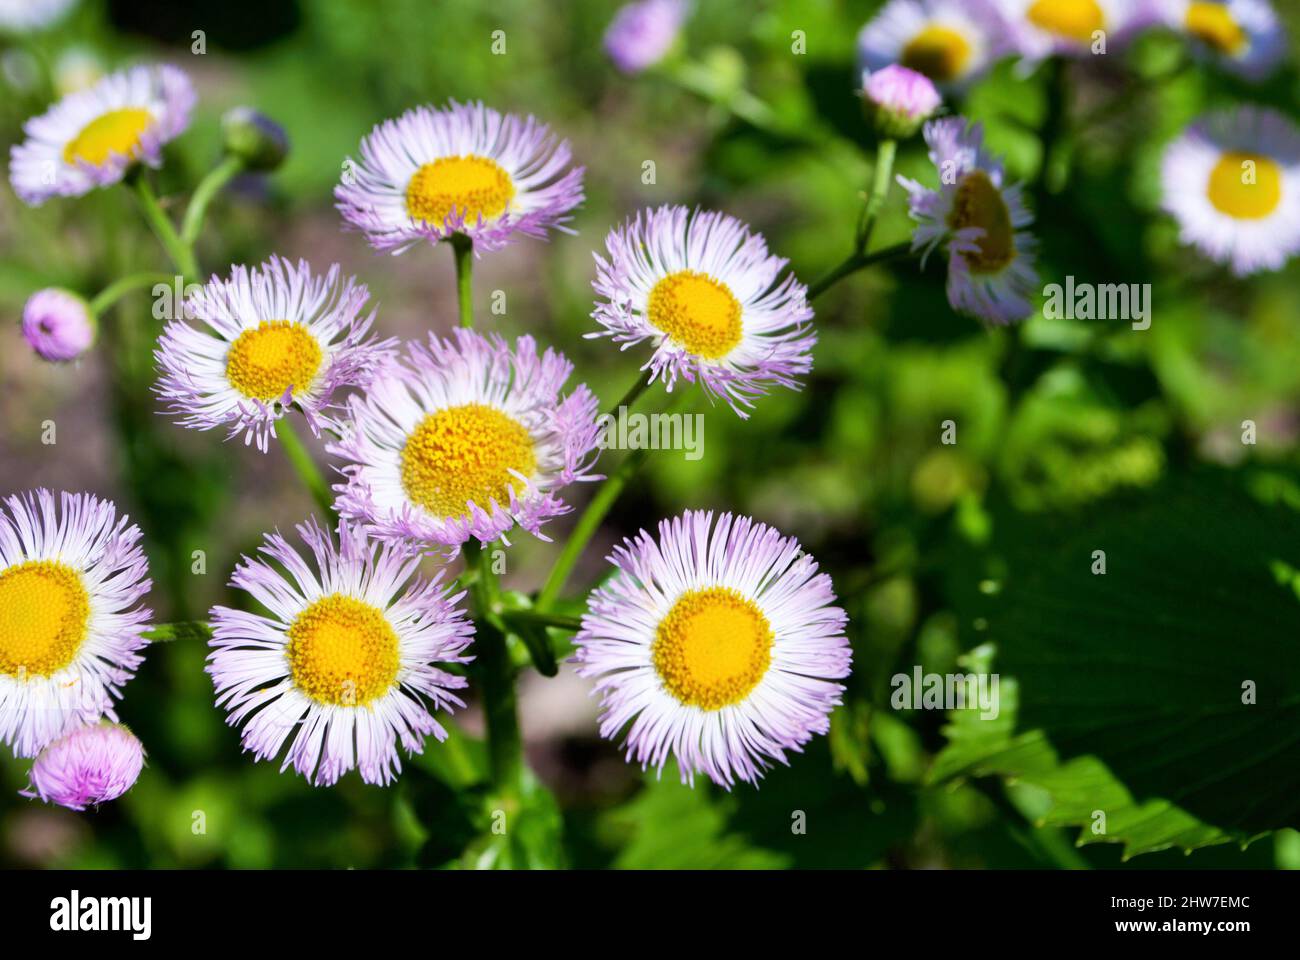 a bunch of little white and purple flowers blooming Stock Photo